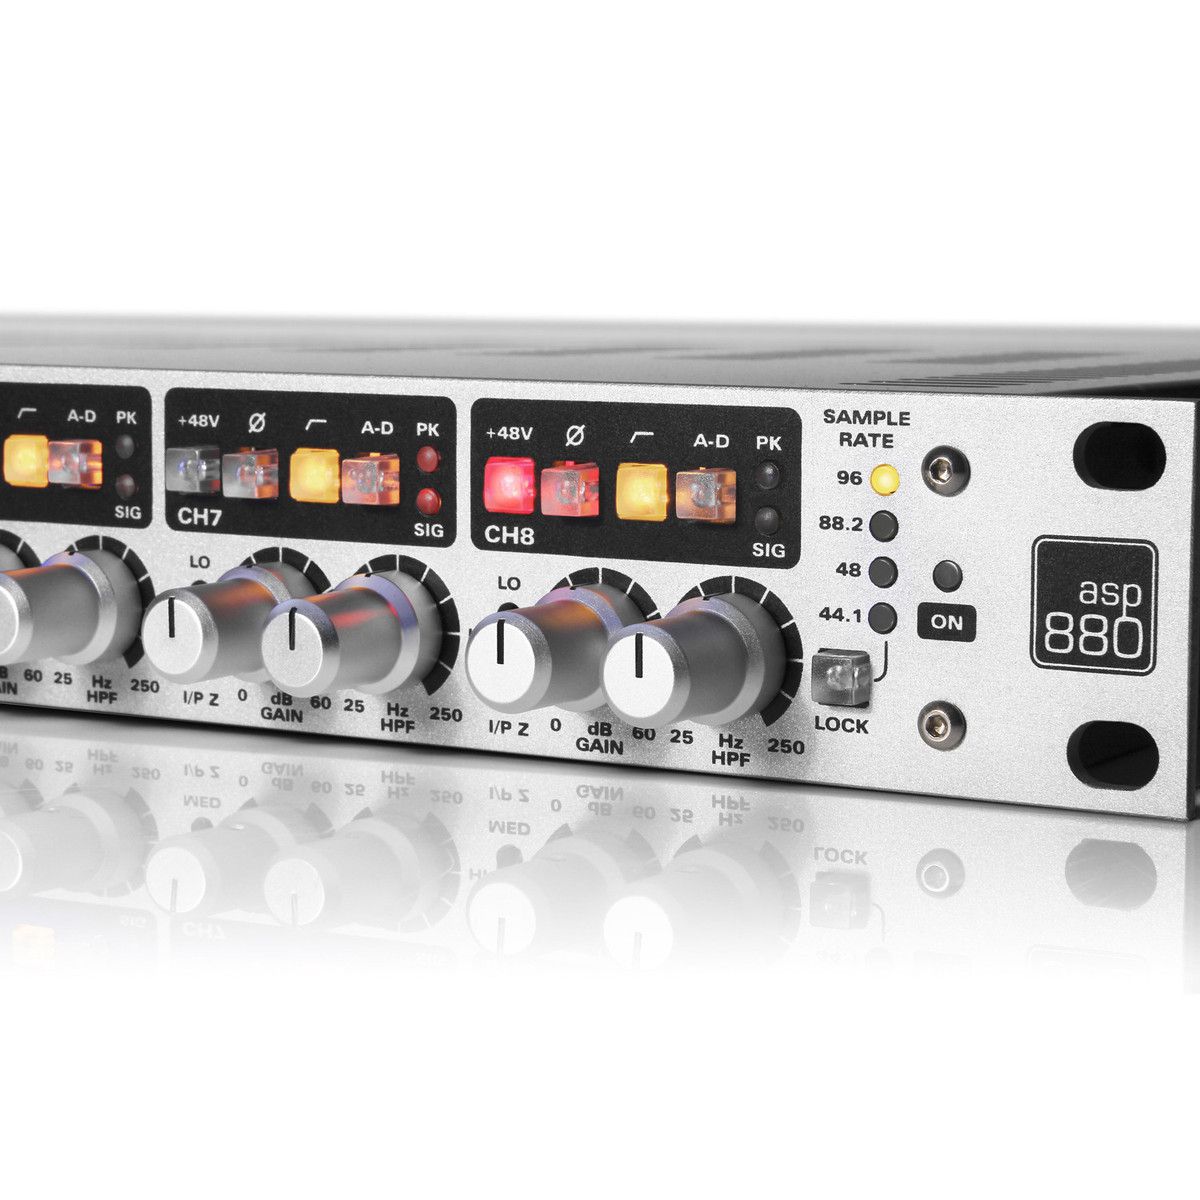 PREAMP P/MICROFONE AUDIENT ASP880